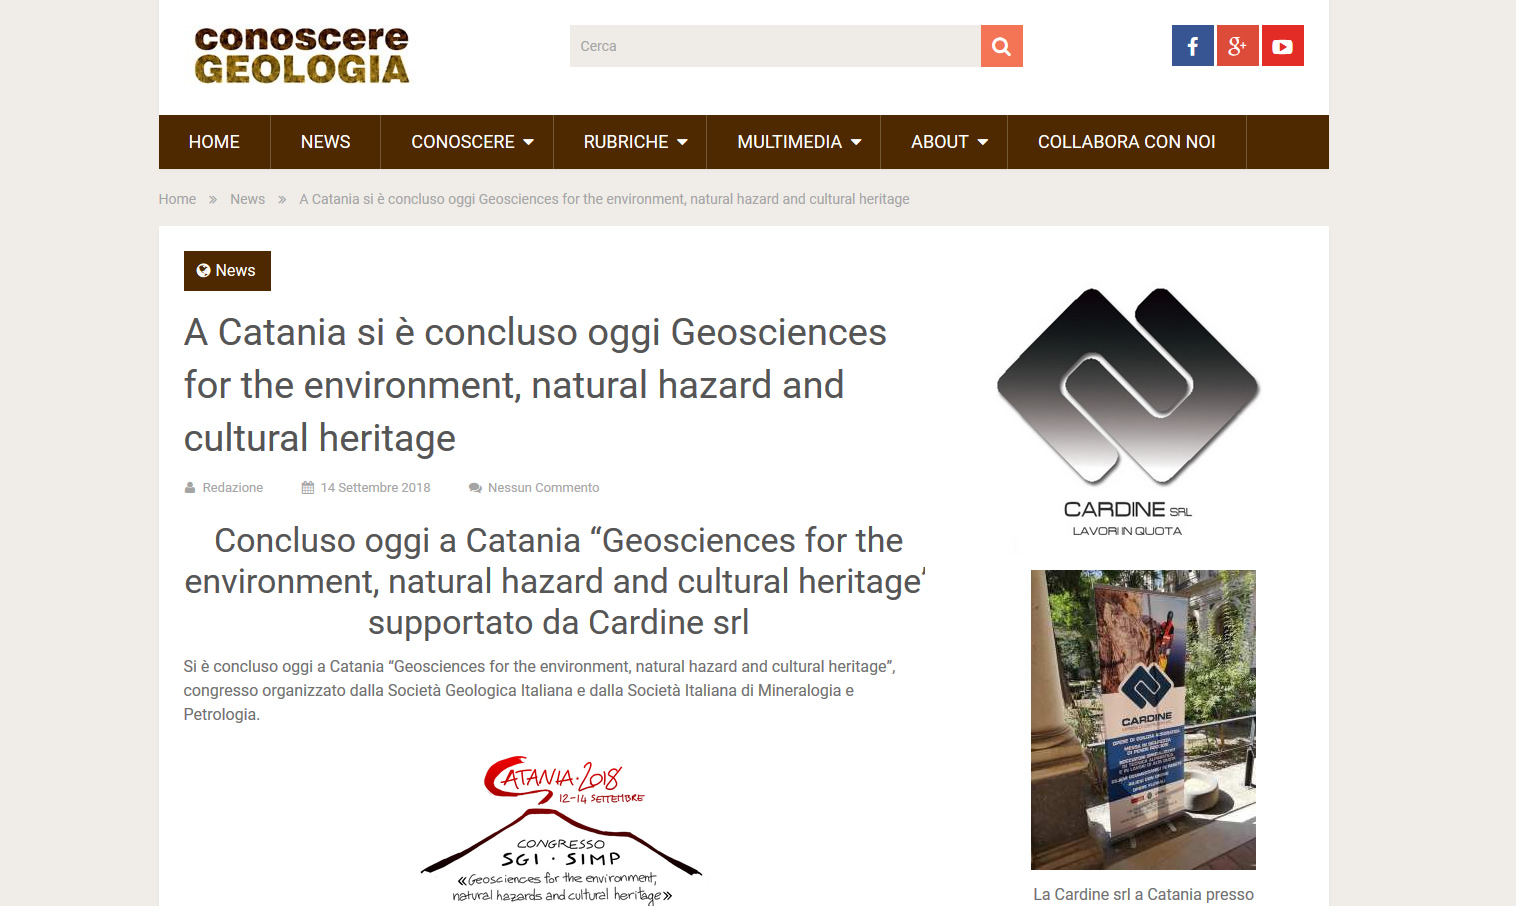 ConoscereGeologia: “Concluso a Catania Geosciences for the environment, natural hazard and cultural heritage”